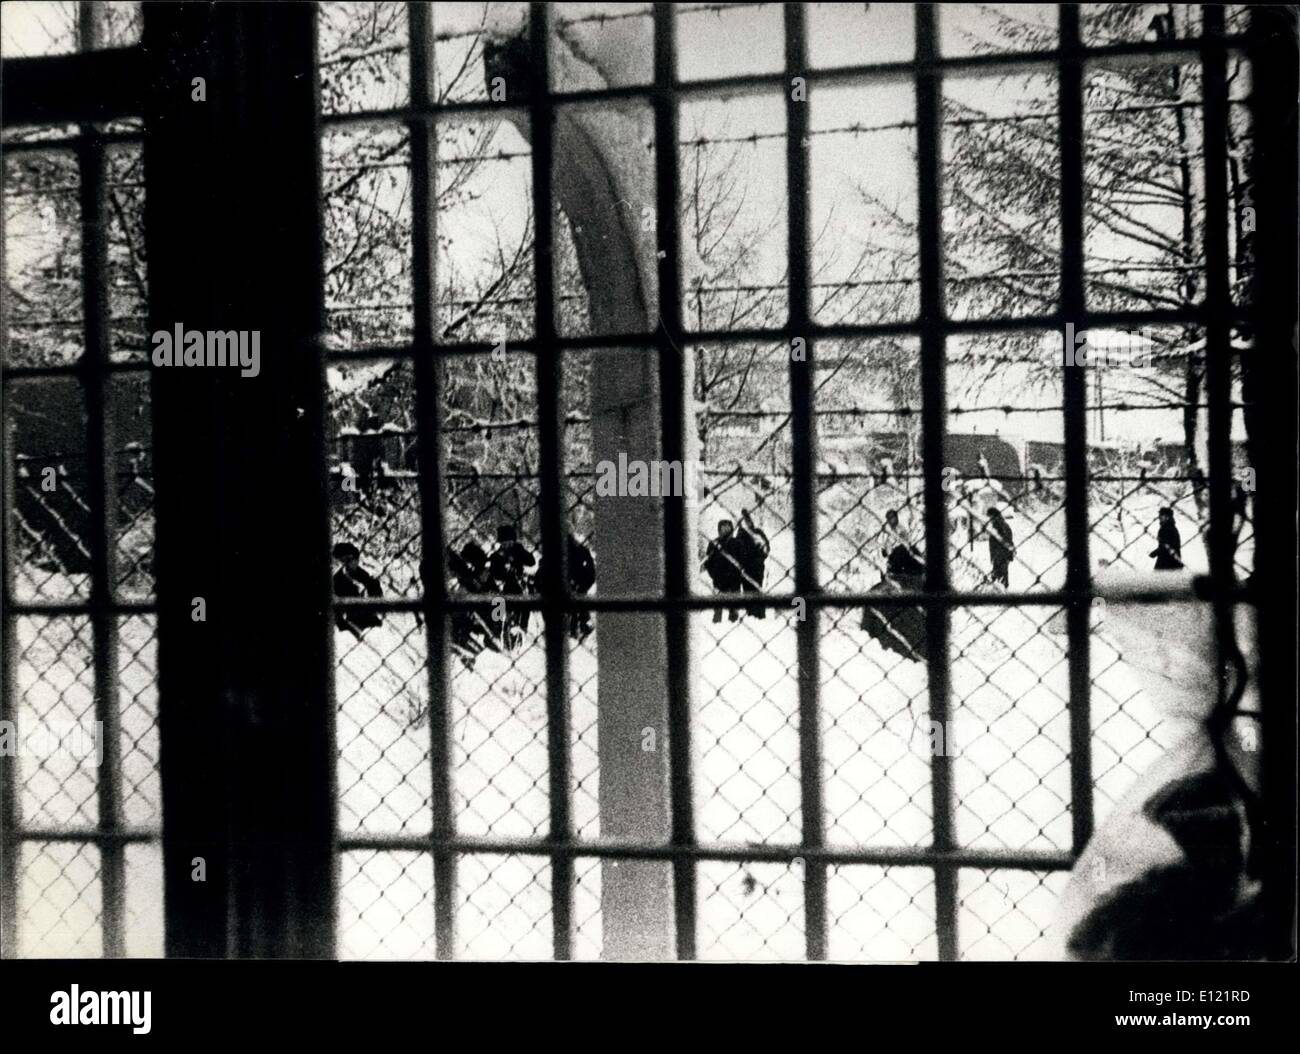 Oct. 01, 1982 - First pictures from Polish internment camps Members of ''Solidarity'' trade union and other intellectuals are seen through the bared window on the backyard of the internment camp of Bialolenka near Warsaw (Poland). This are the first pictures being brought to Western Europe recently. At Bialolenka camp and others Polish martial law government arrested members of ''Solidarity'' and other persons so called ''Dissidents' Stock Photo